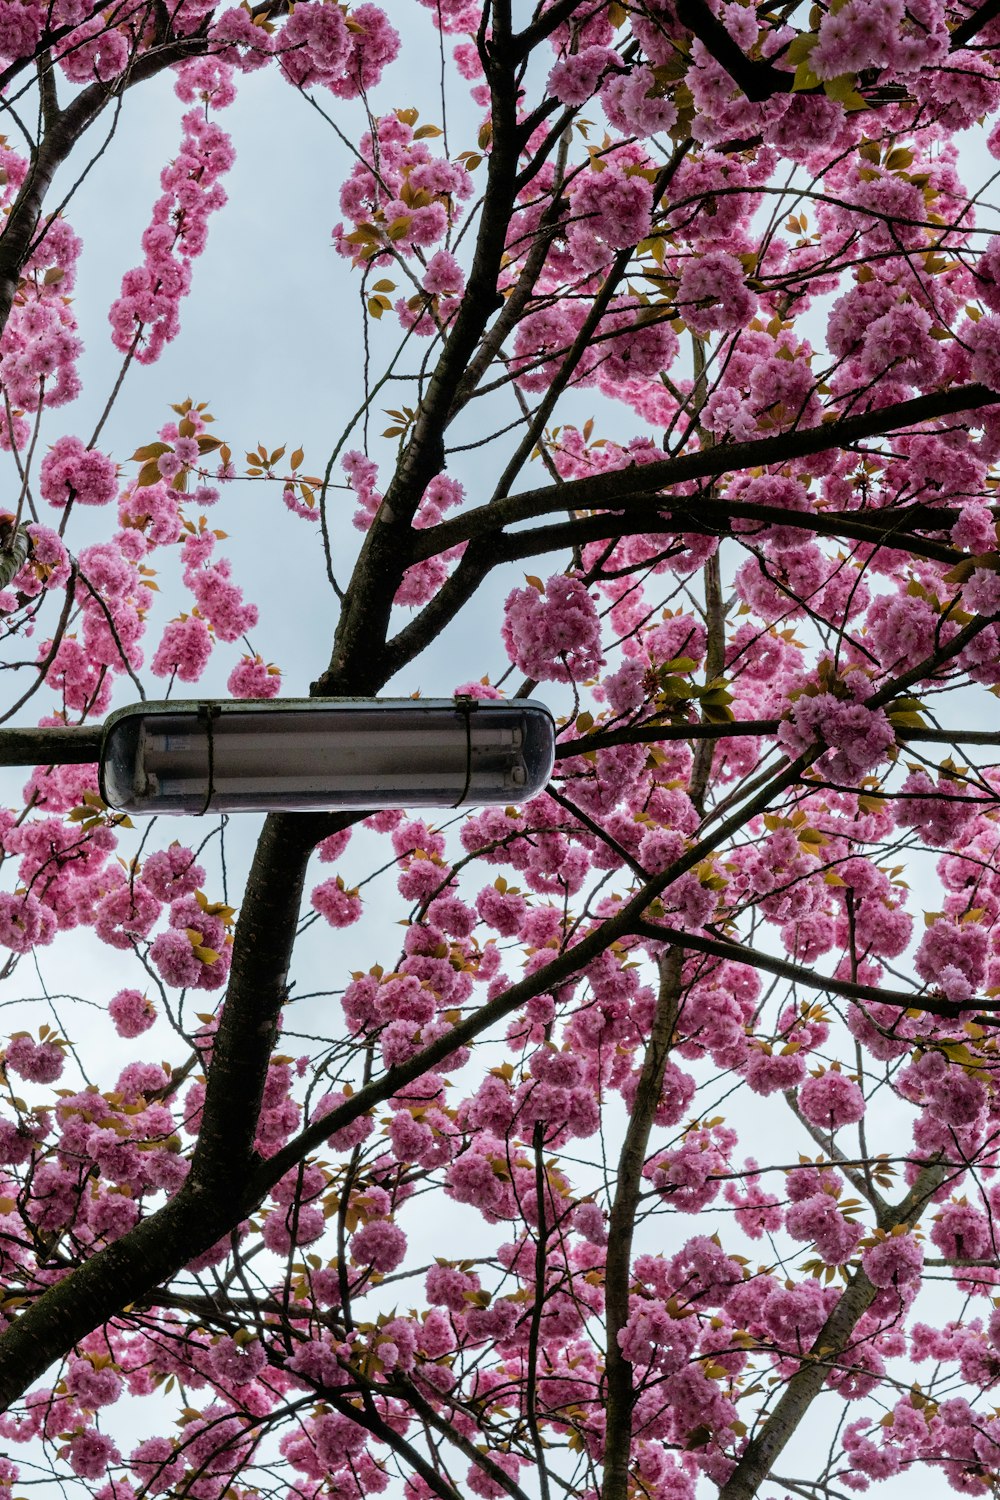 a street sign in front of a tree with pink flowers